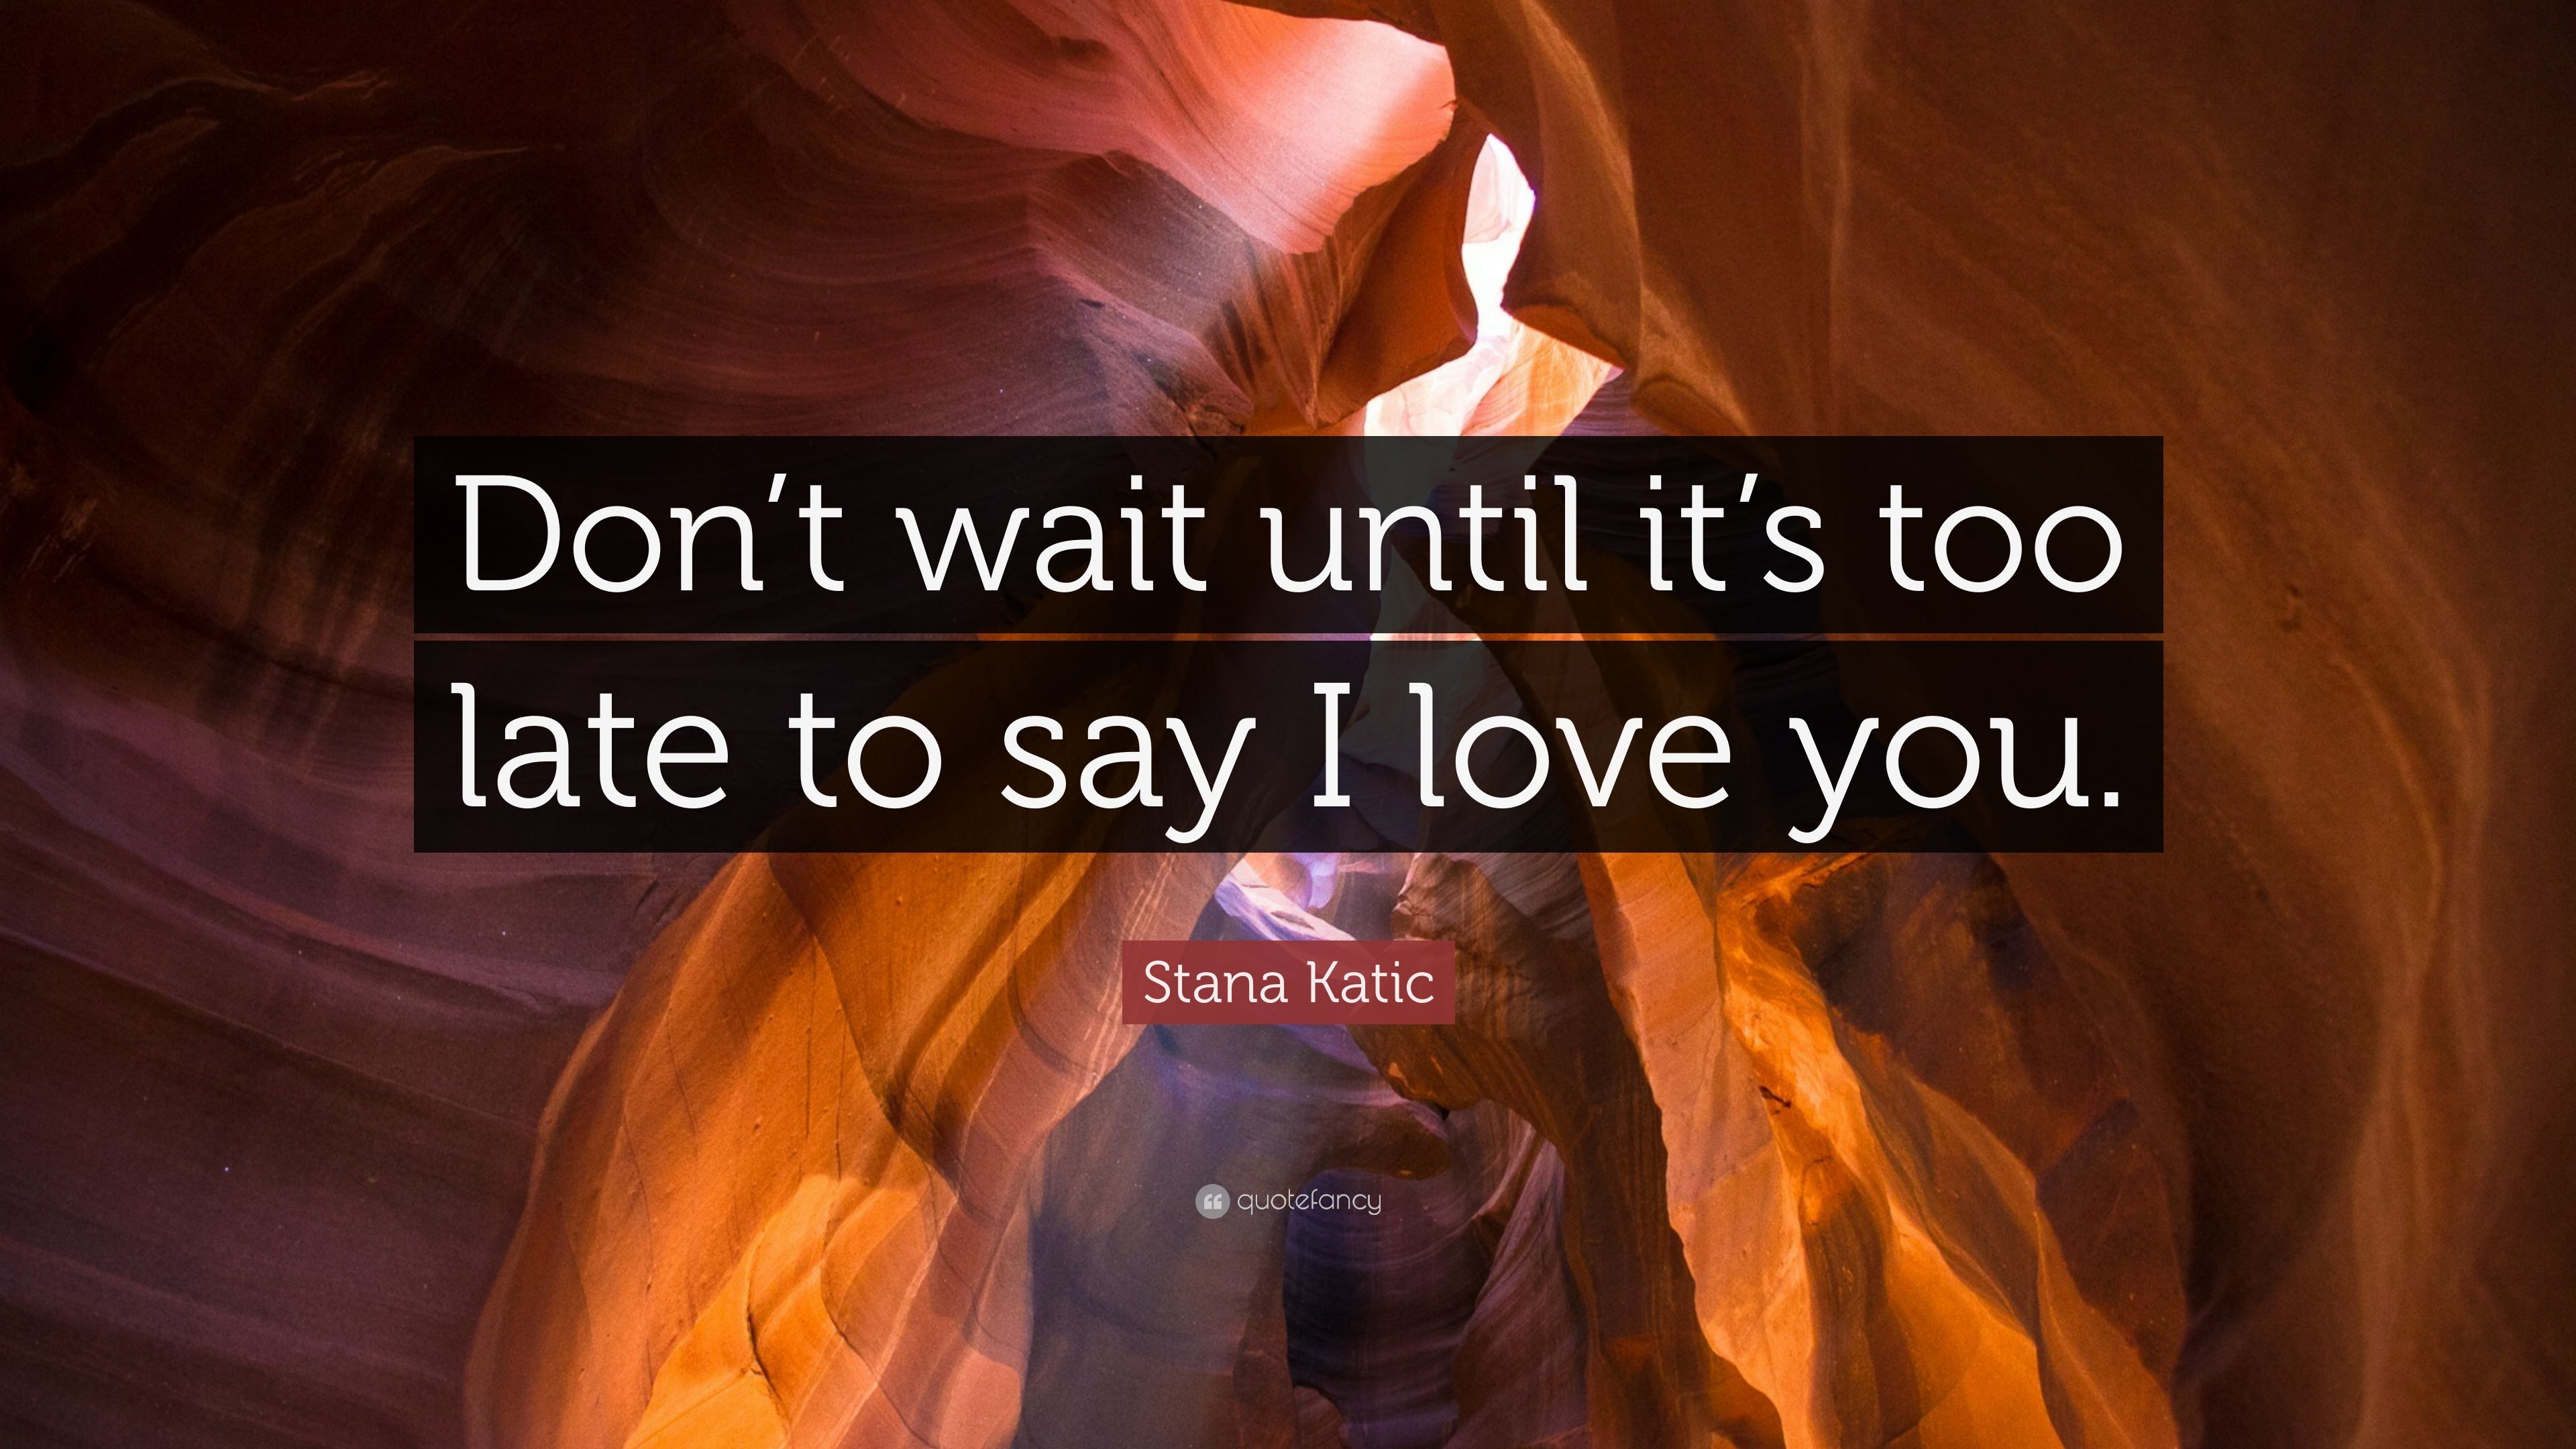 Stana Katic Quote: “Don't wait until it's too late to say I love you.” (9 wallpaper)